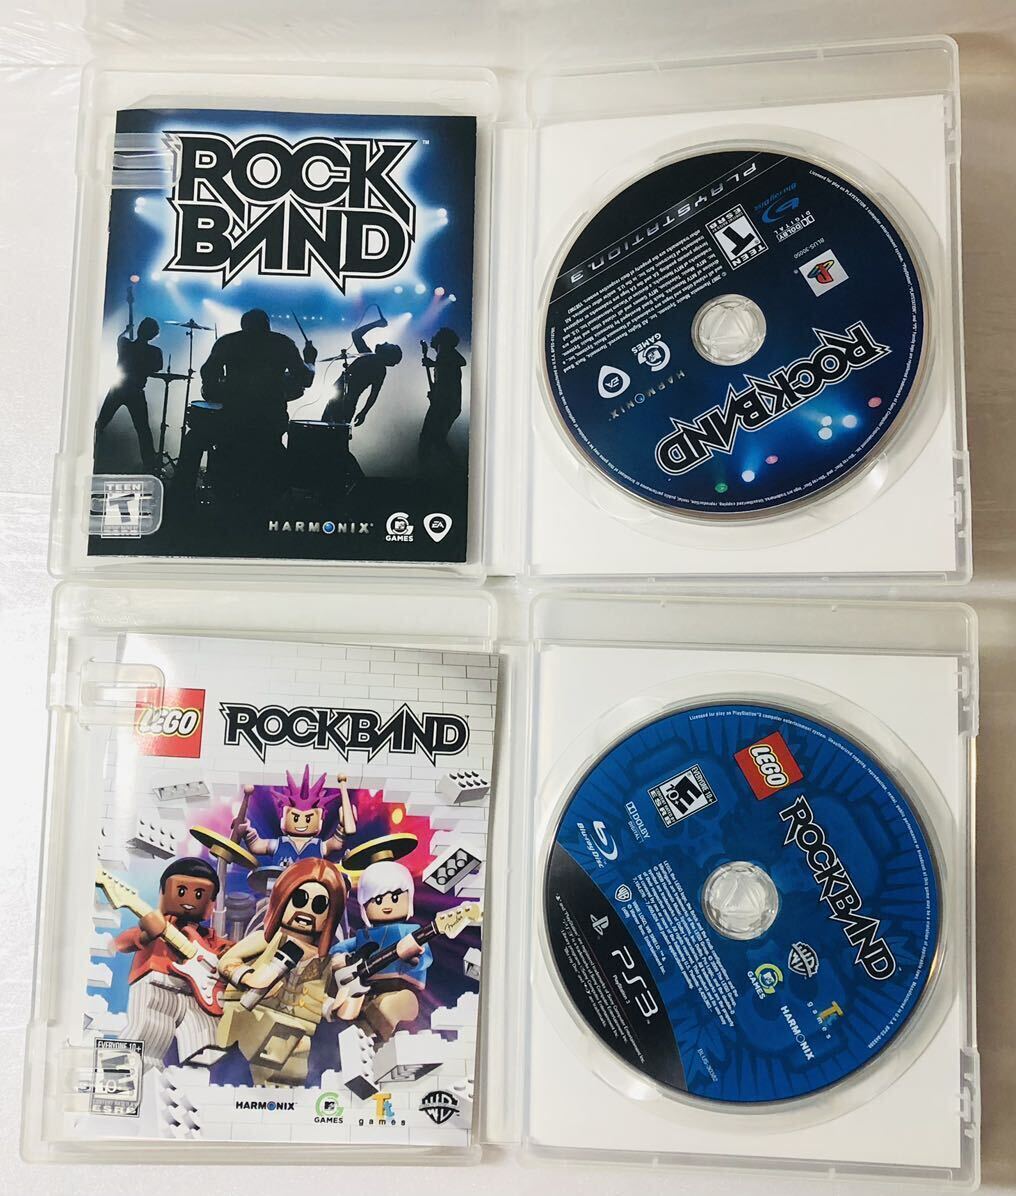 ROCK BAND 輸入版 4本セット （ EA ゲーム PS3 プレーステーション3 ）LEGO COUNTRY TRACK PACK COUNTRY TRACK PACK2_画像5